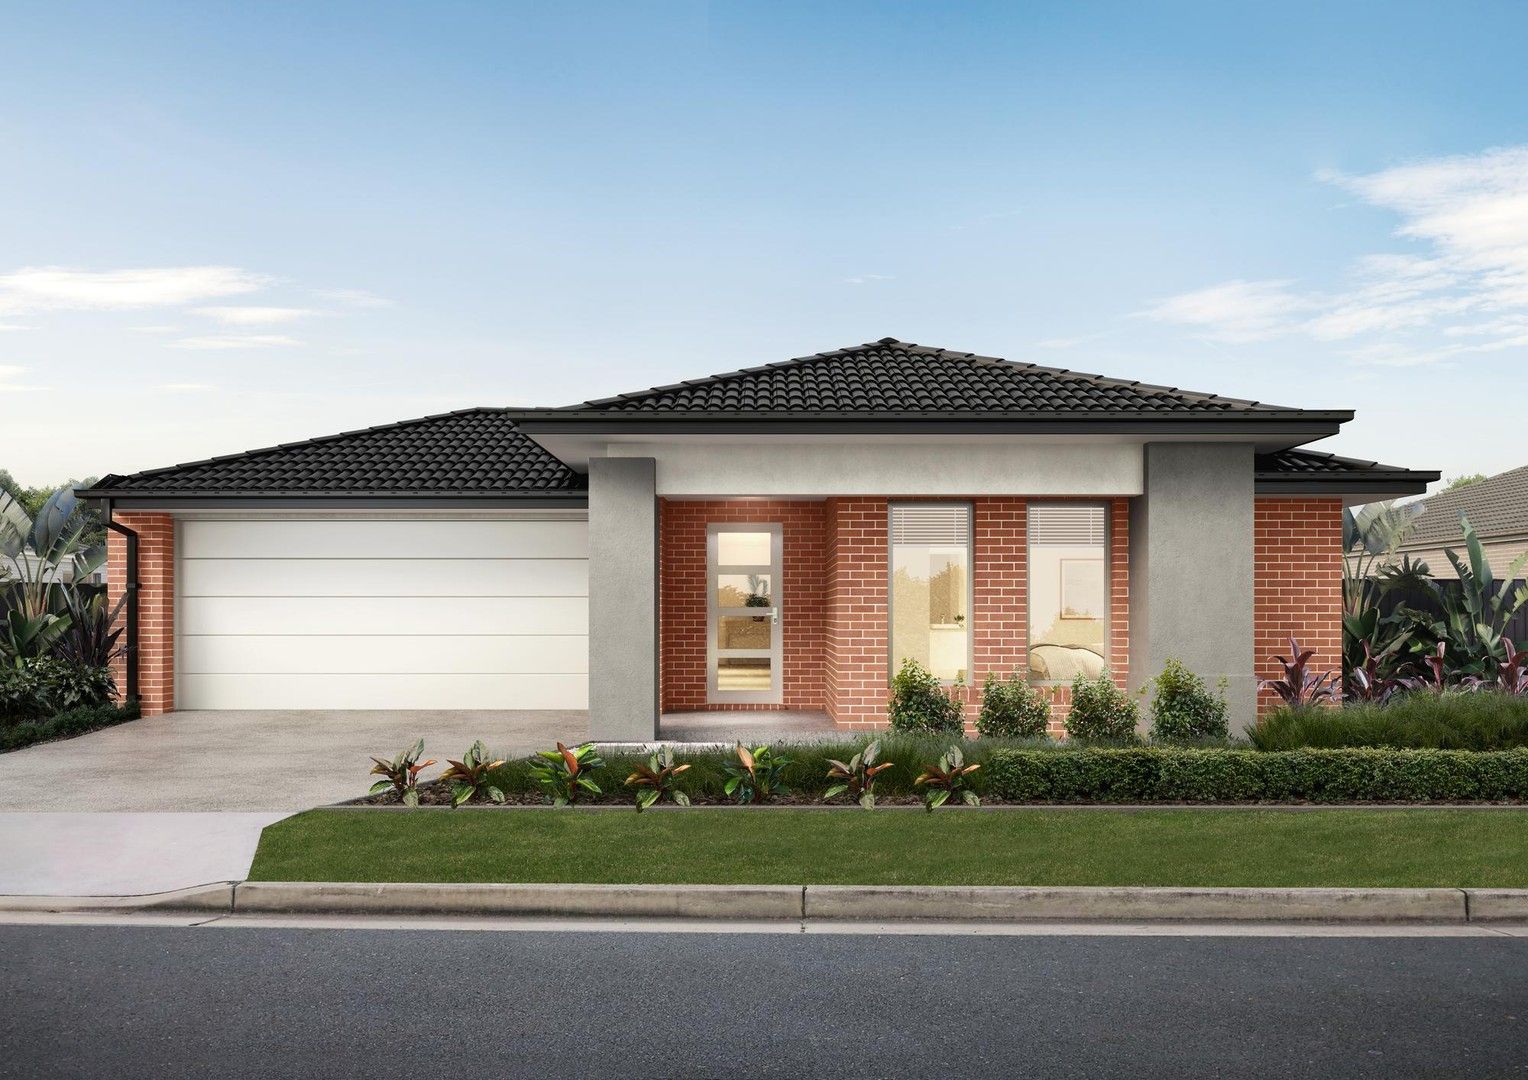 4 bedrooms New House & Land in 1596 Dutton Parade GAWLER EAST SA, 5118